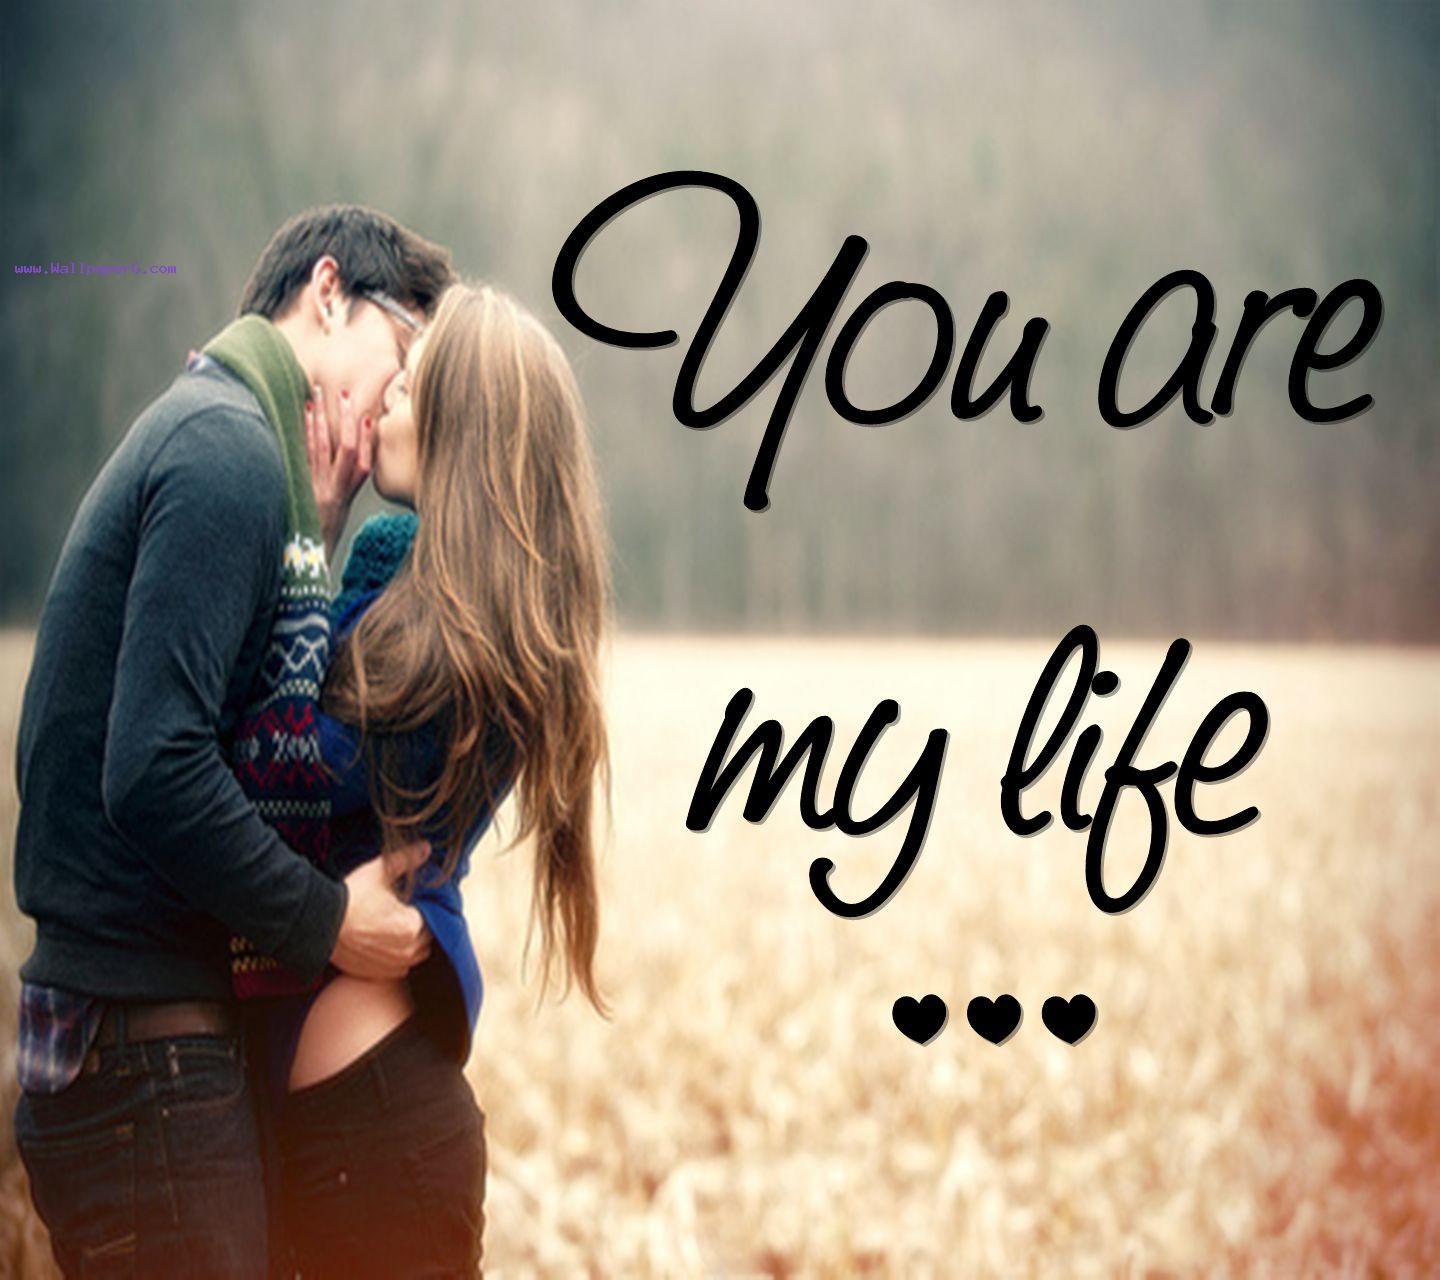 wallpaper cute love quotes